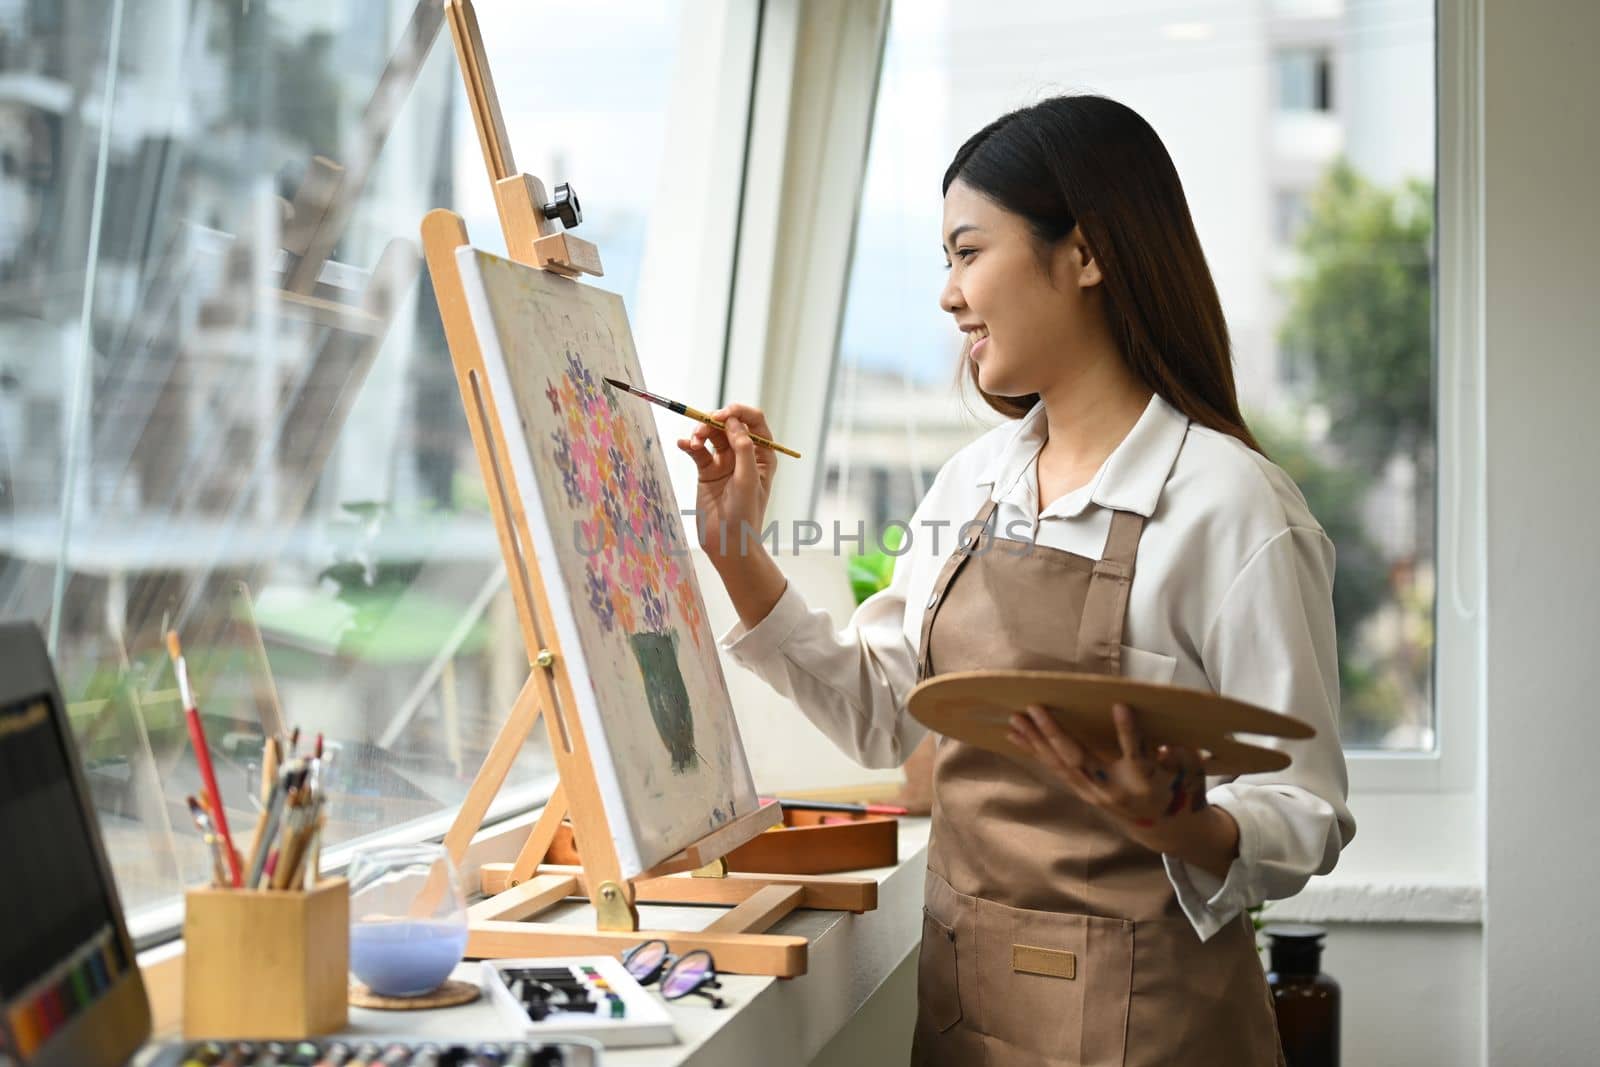 Beautiful asian woman painting picture with acrylic paints on canvas, enjoying creative leisure activities. Art and leisure activity concept.